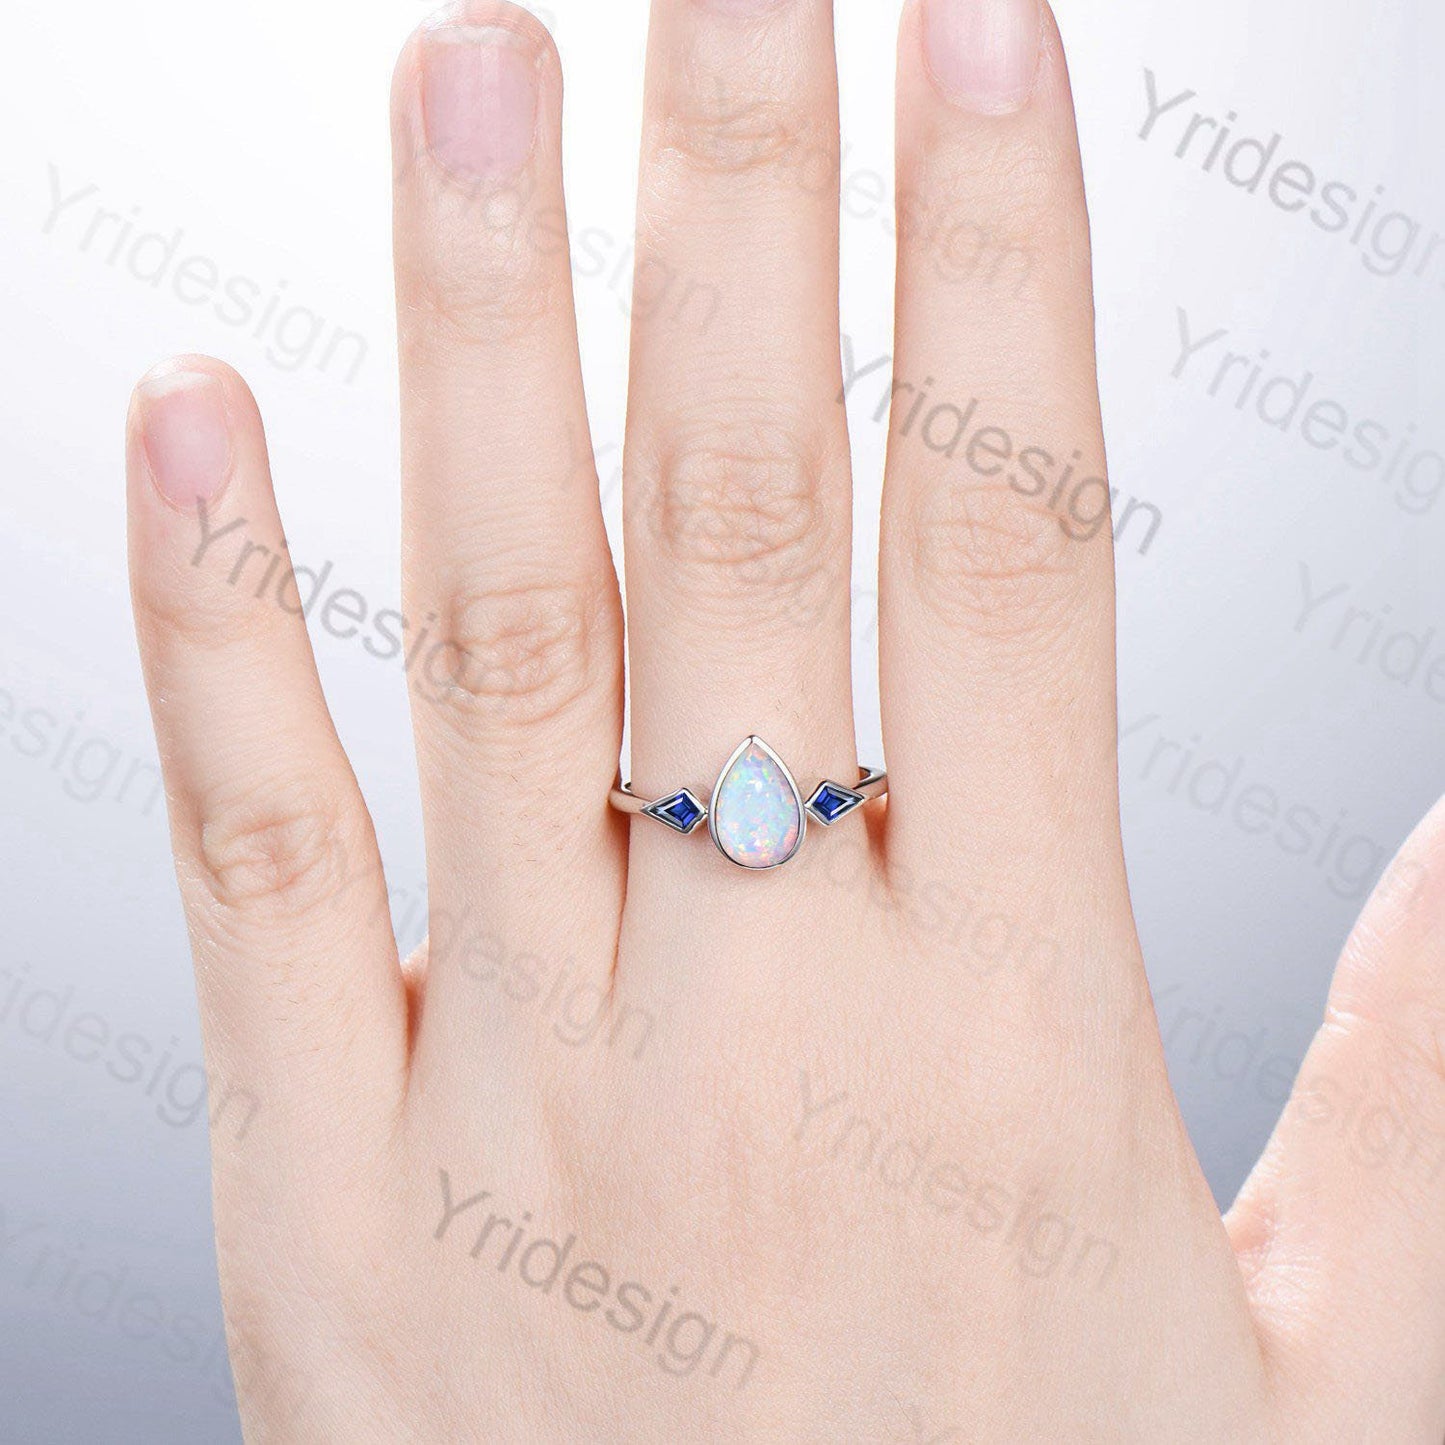 Bezel Set Opal Ring Pear Shaped White Opal Engagement Ring Vintage Minimalist Opal Sapphire Wedding Ring For Women Three Stone Promise Ring - PENFINE